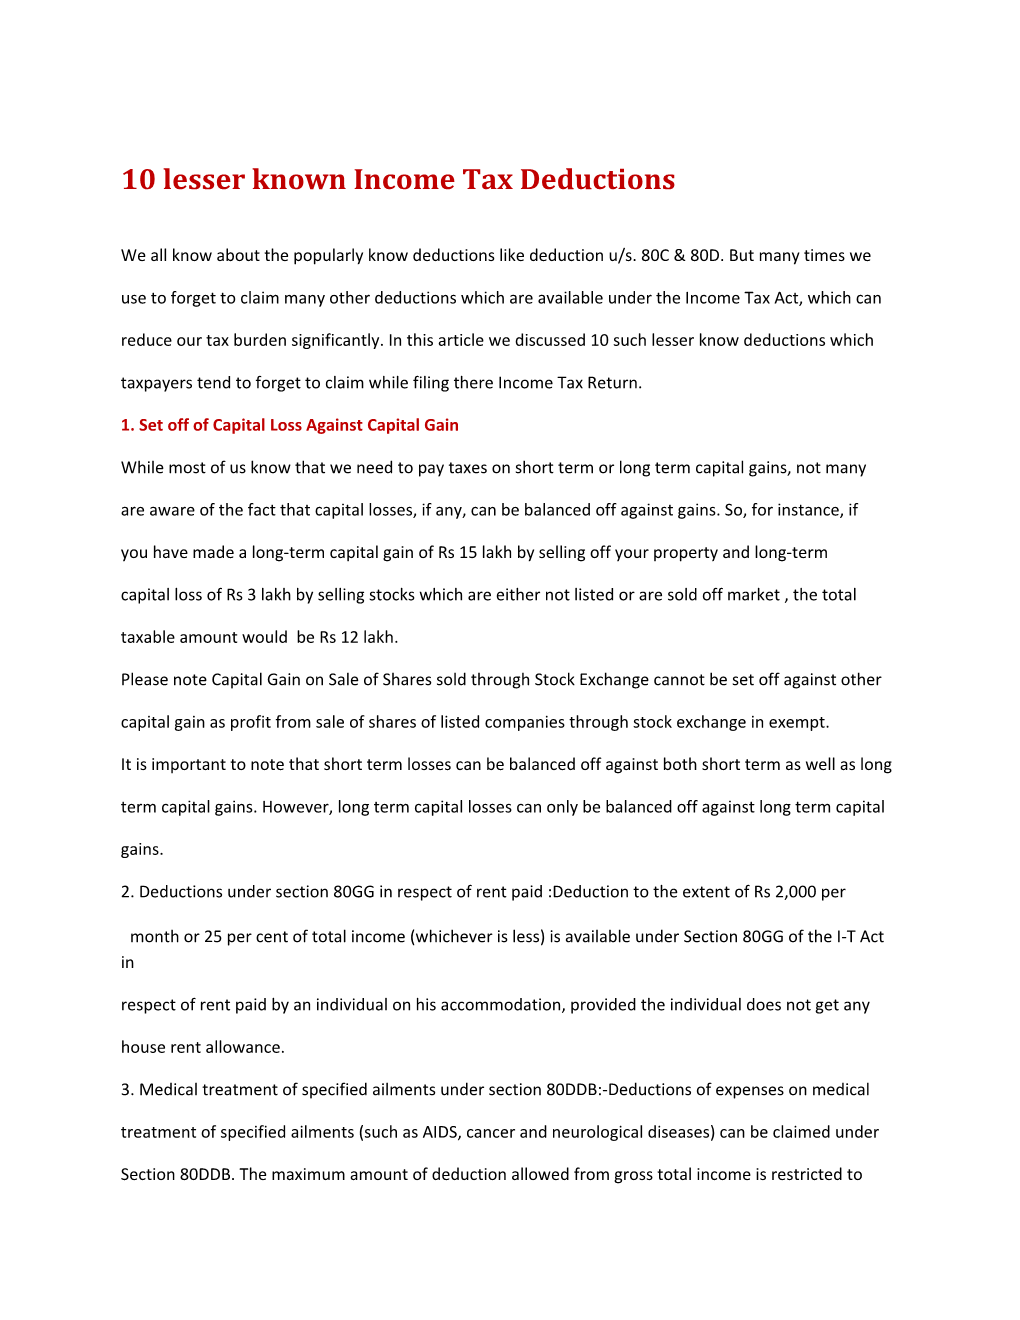 10 Lesser Known Income Tax Deductions